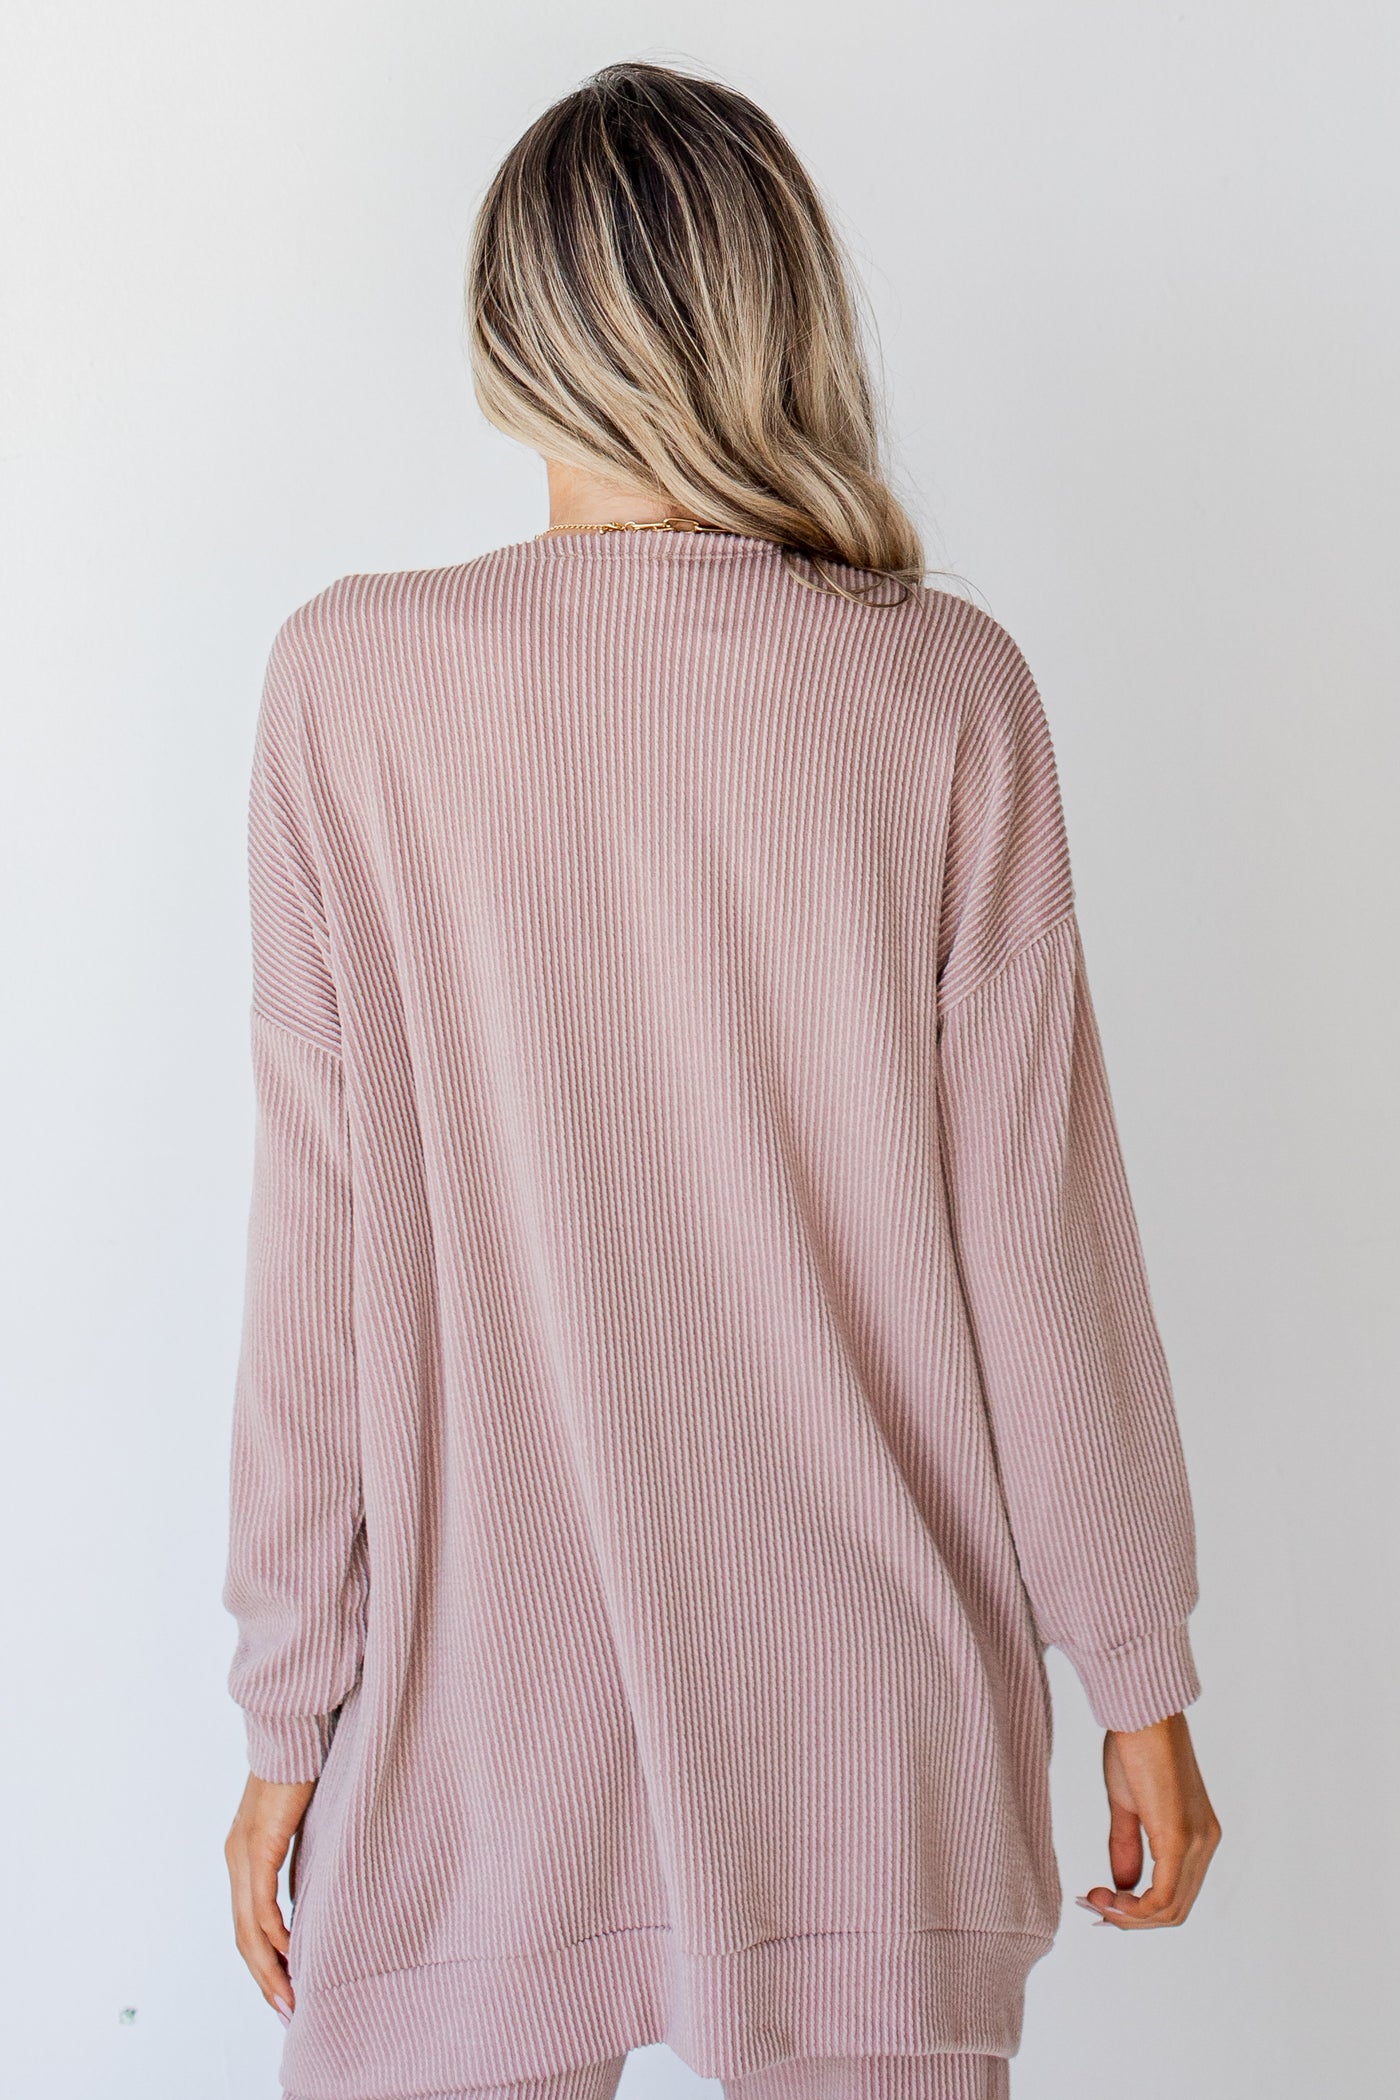 Corded Cardigan in blush back view